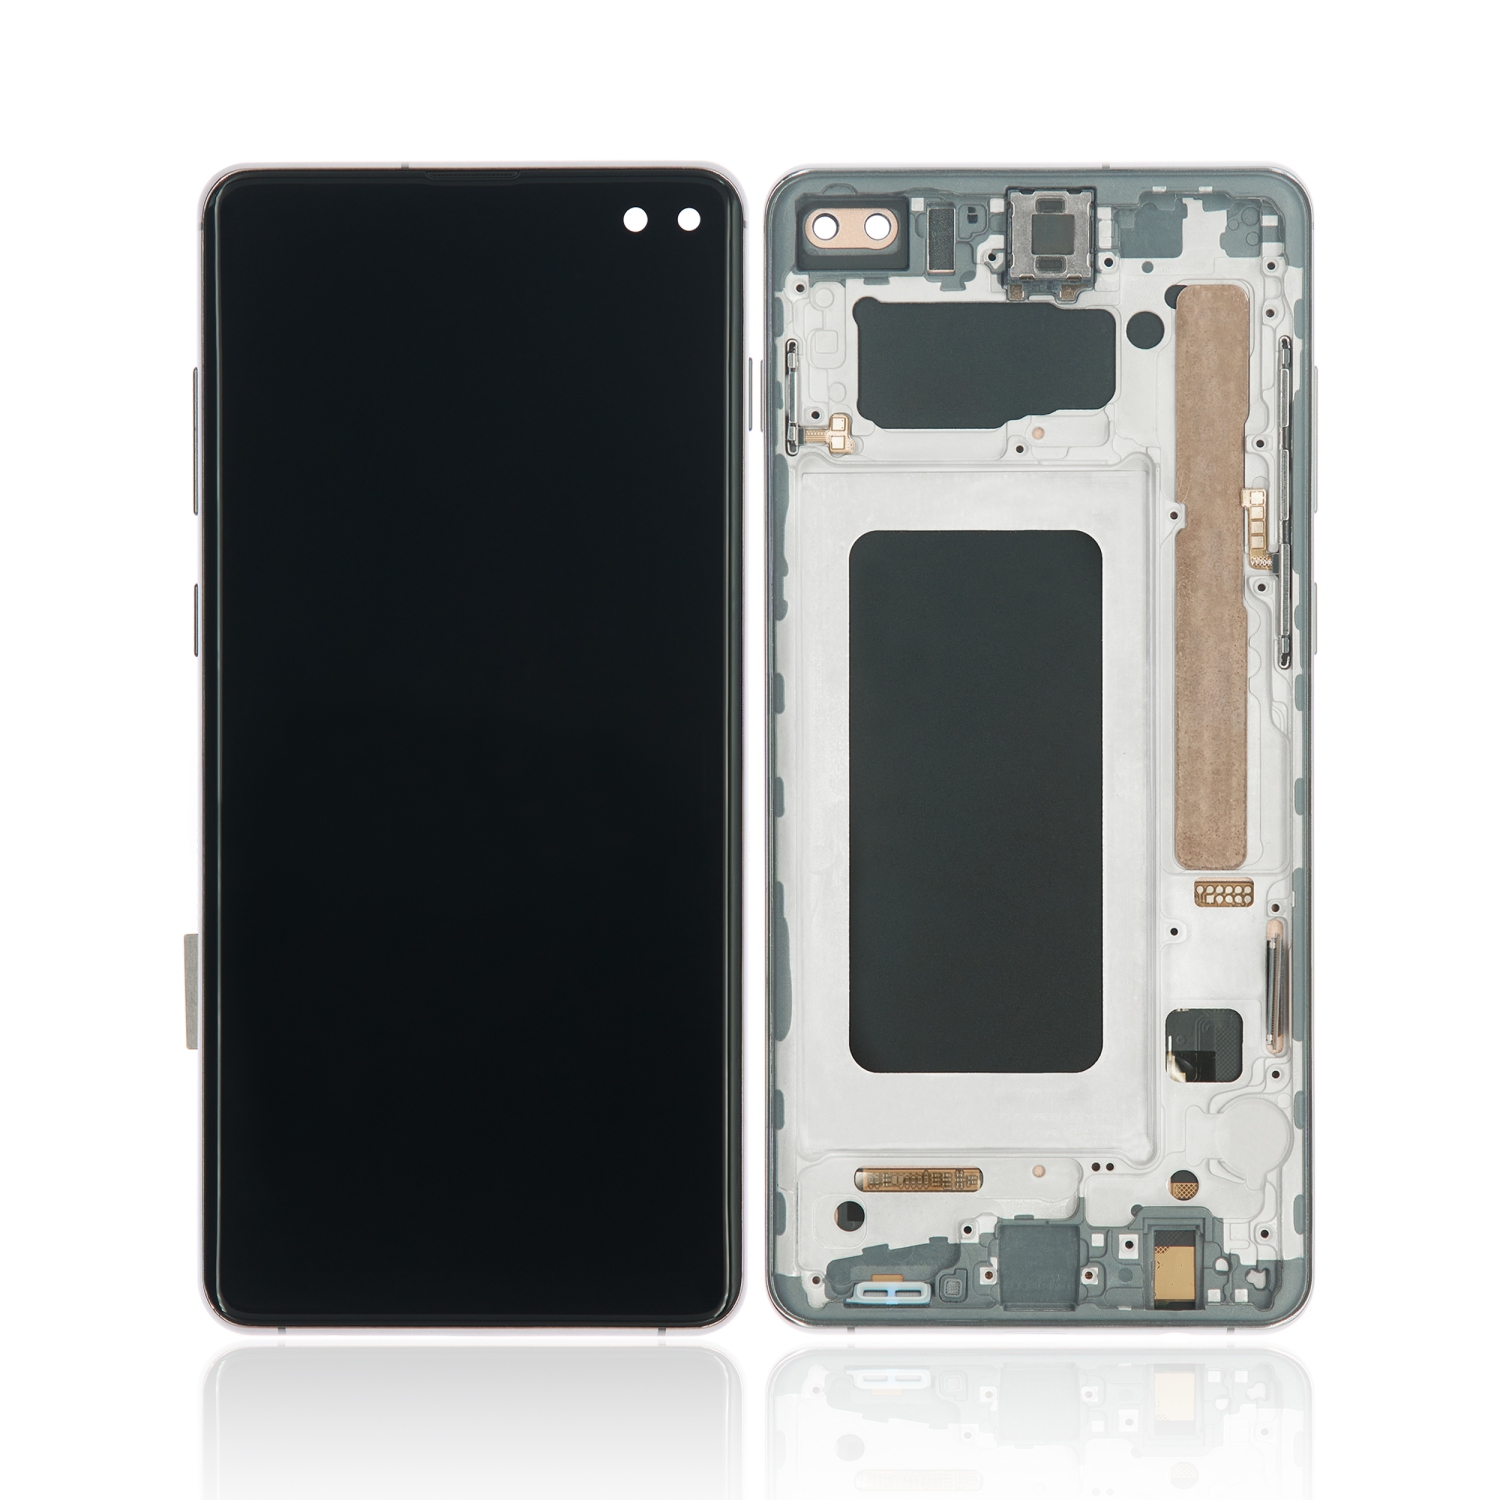 Replacement LCD Assembly With Frame (Without Finger Print Sensor) Compatible For Samsung Galaxy S10 Plus (Aftermarket Plus: TFT) (Prism / Ceramic Black)